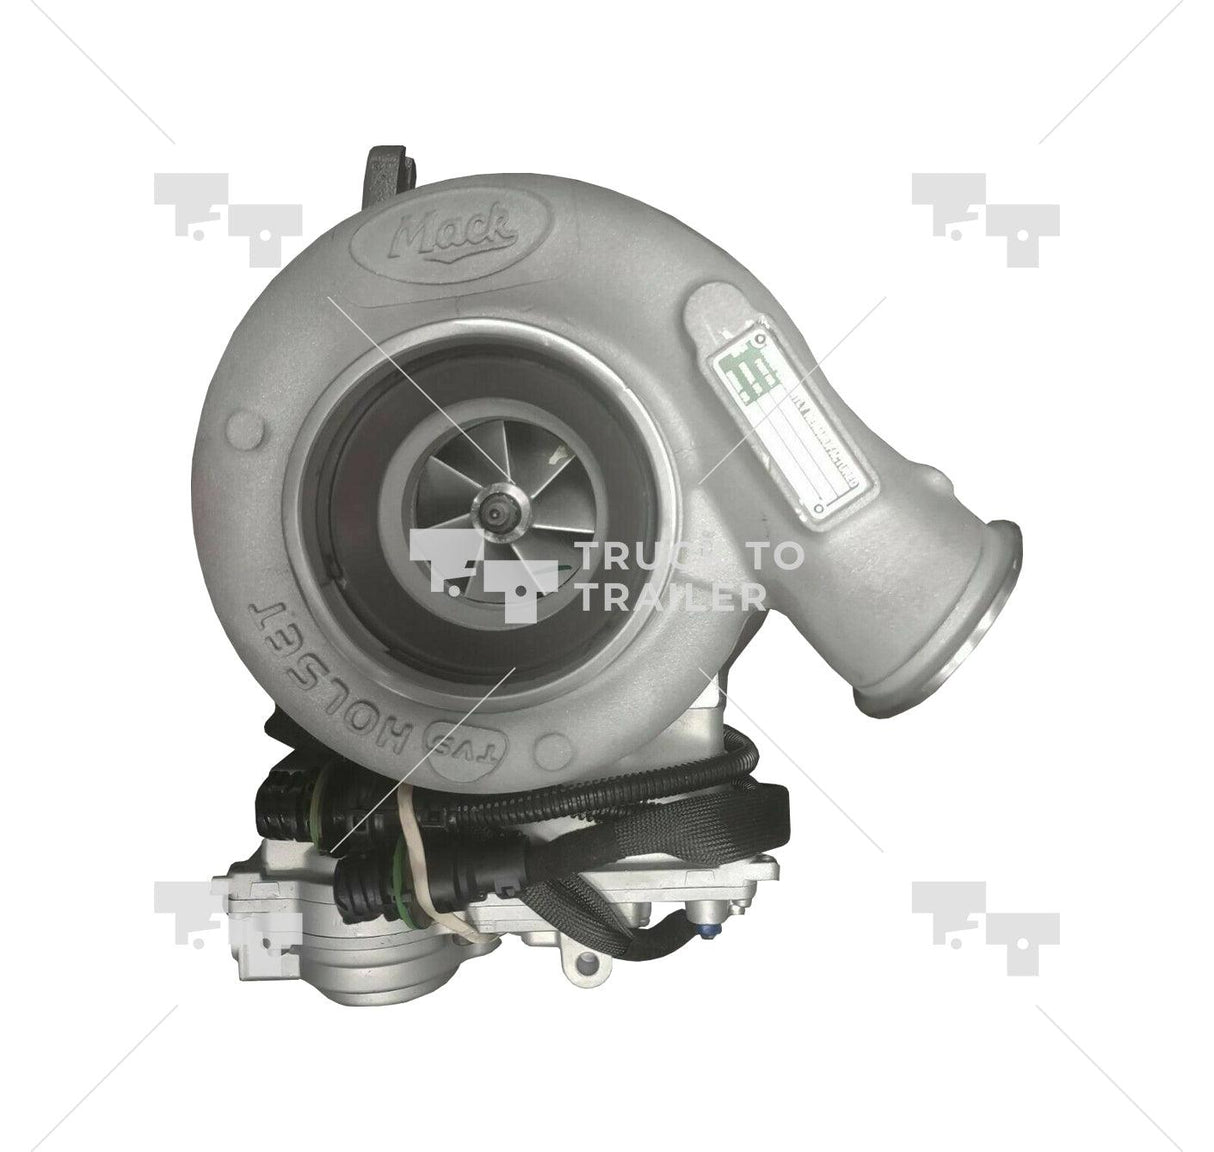 170-032-1616 Volvo Turbocharger With Actuator For Mp7 Md11 No Core Charge - Truck To Trailer